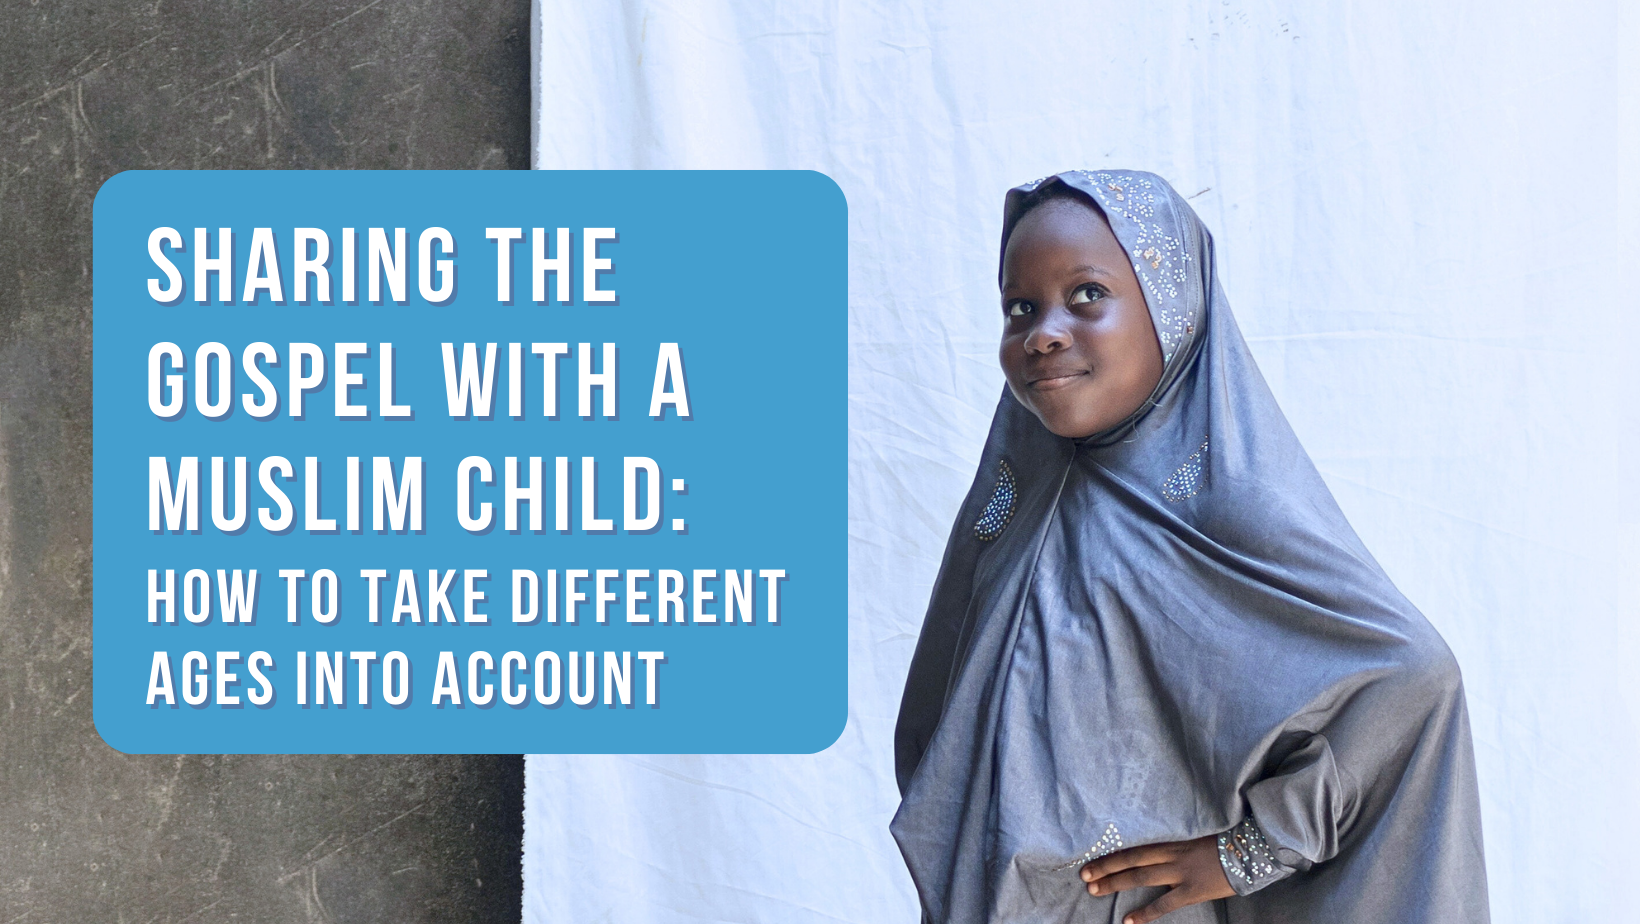 Sharing the Gospel with a Muslim child: How to take different ages into account